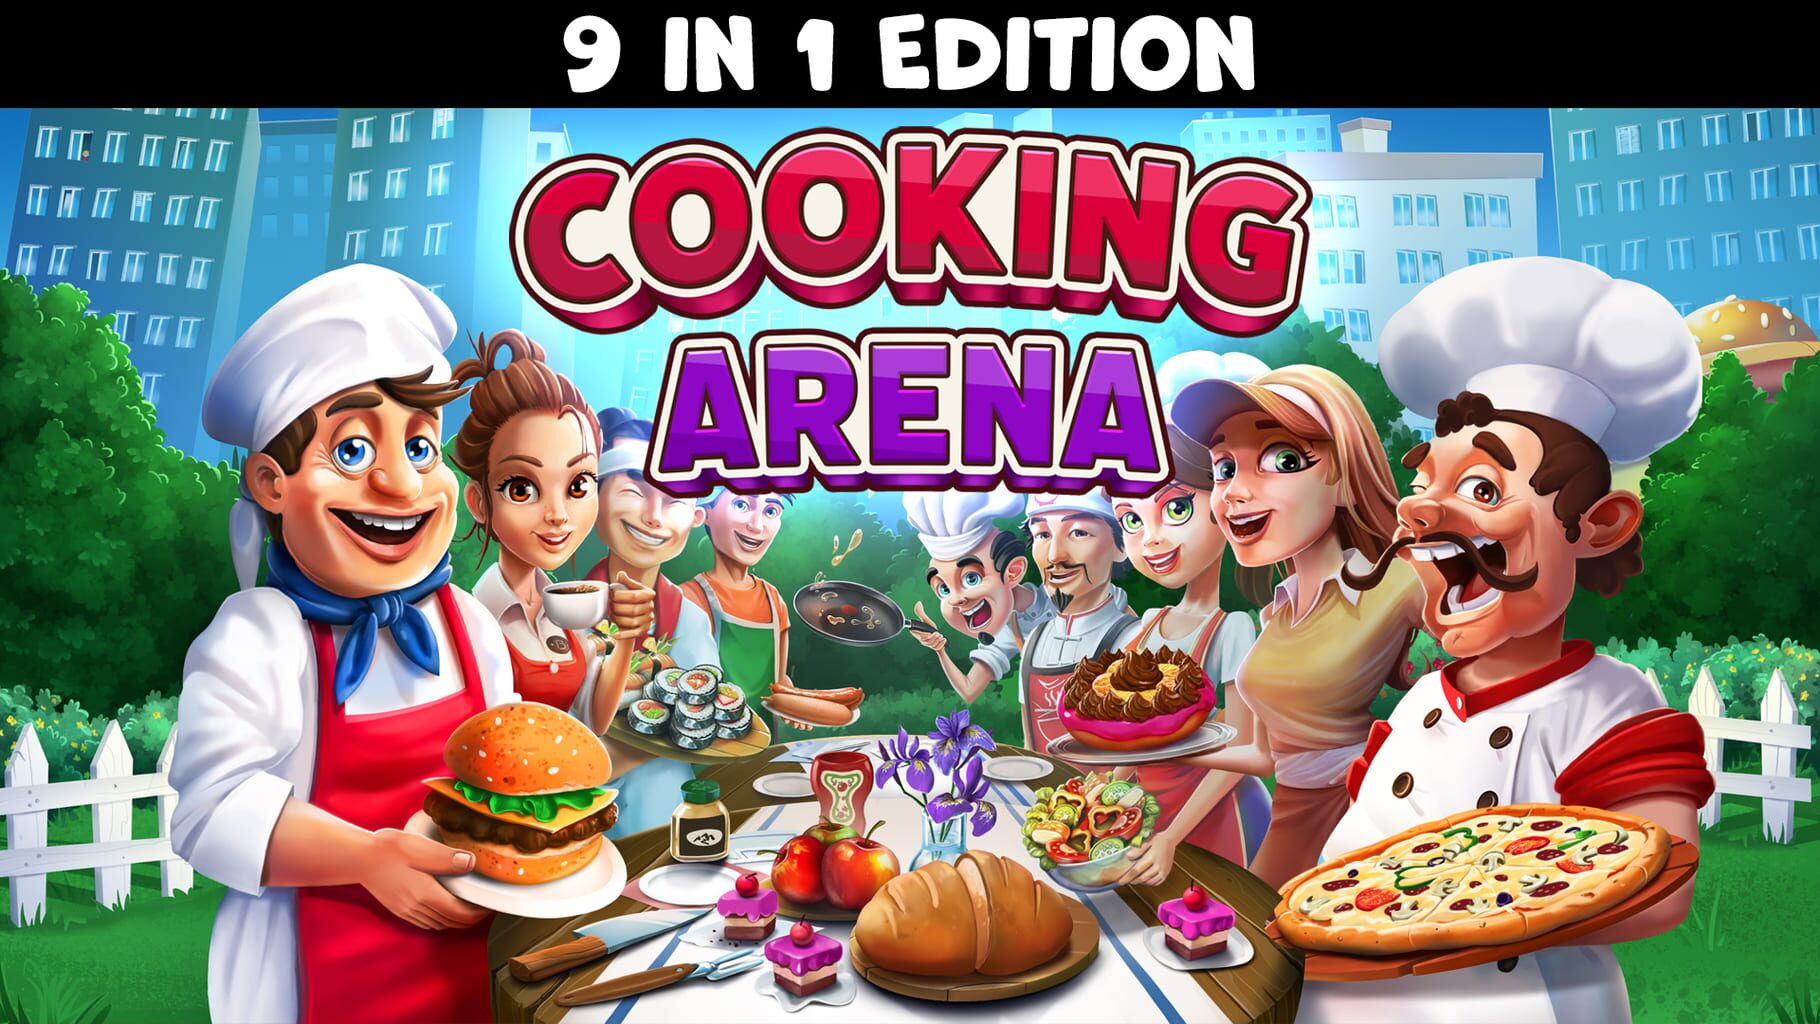 Cooking Arena: 9 in 1 Edition artwork